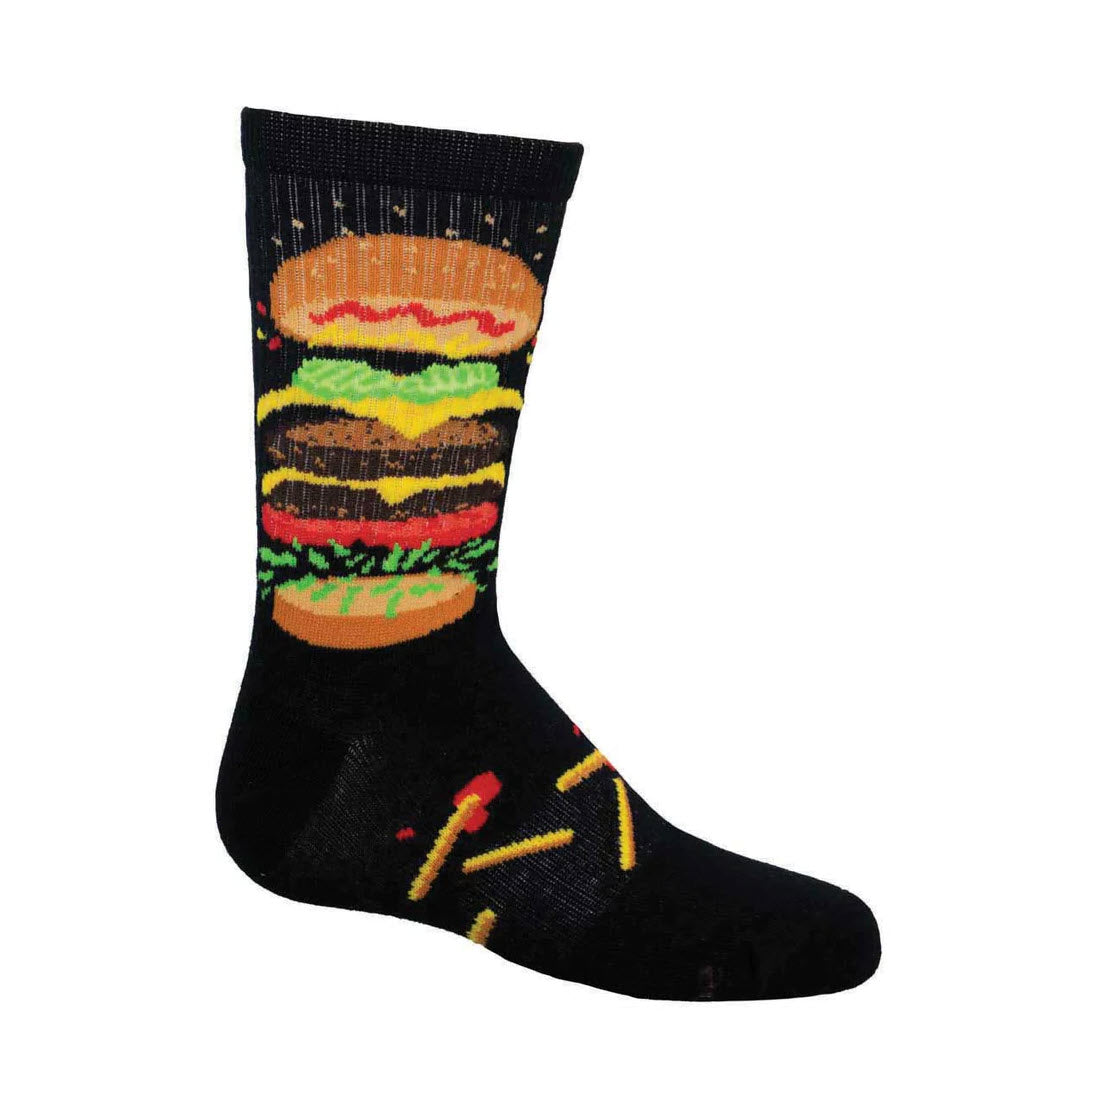 A SOCKSMITH NOT SO SHABBY PATTY CREW SOCKS BLACK - KIDS featuring a fun knitted design of a burger and small french fries scattered near the toes.